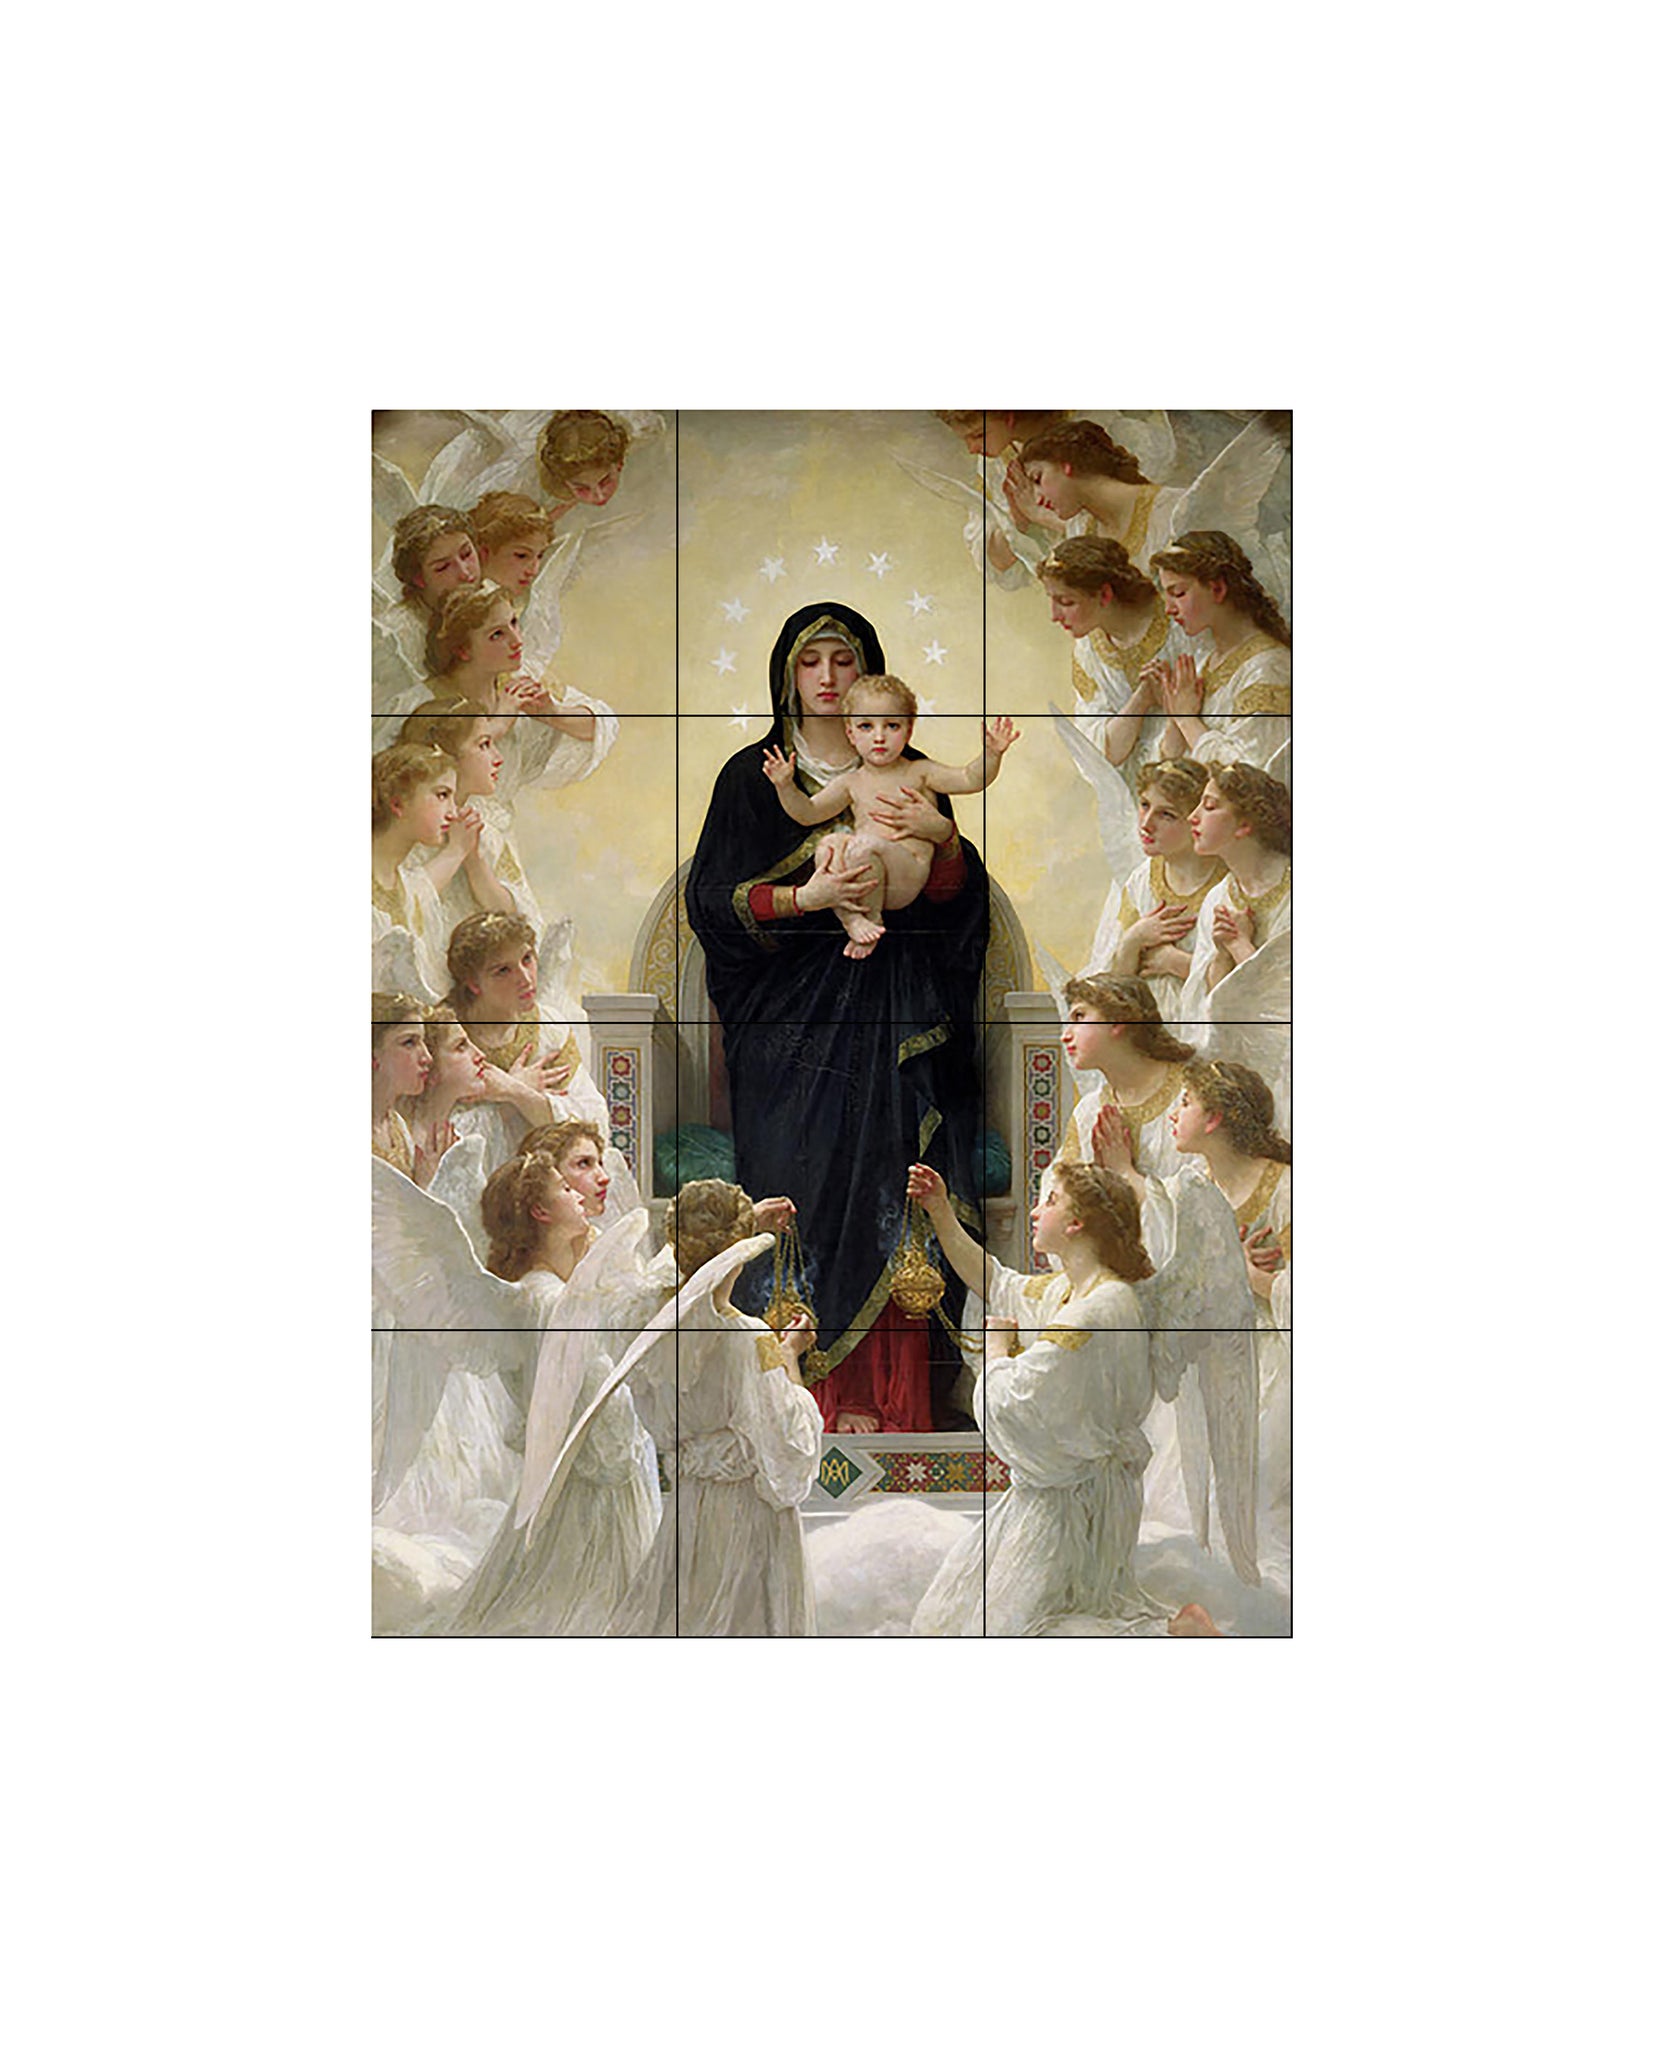 Virgin Mary holding the Christ Child surrounded by angels